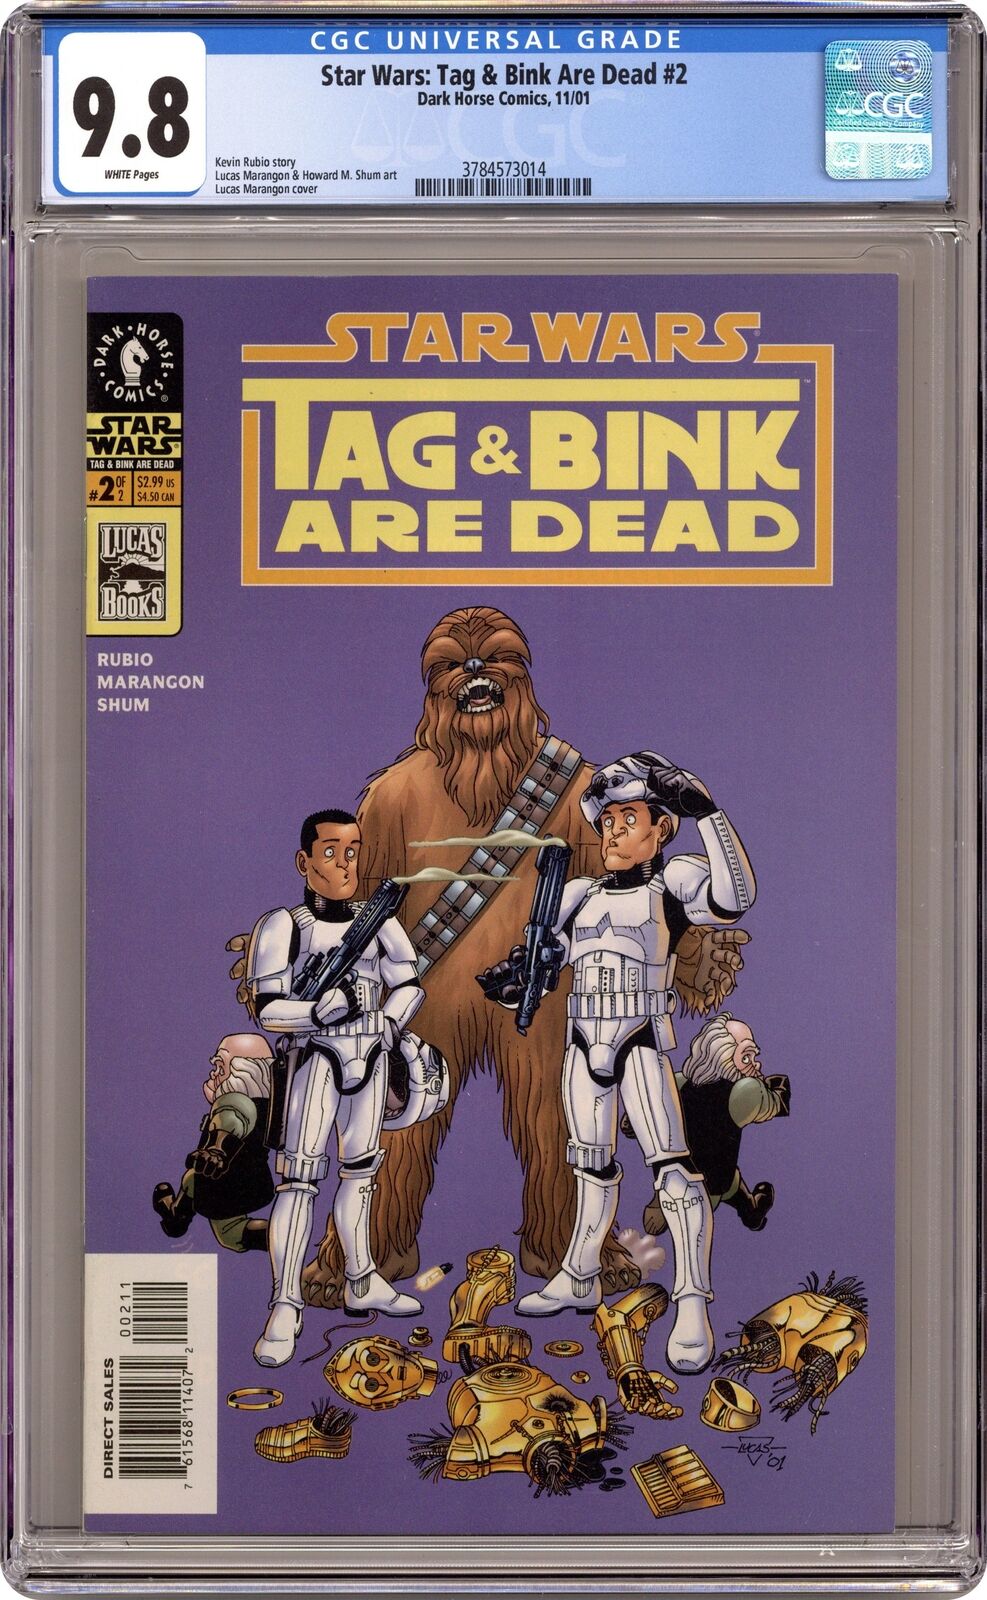 Star Wars Tag and Bink are Dead #2 CGC 9.8 2001 3784573014